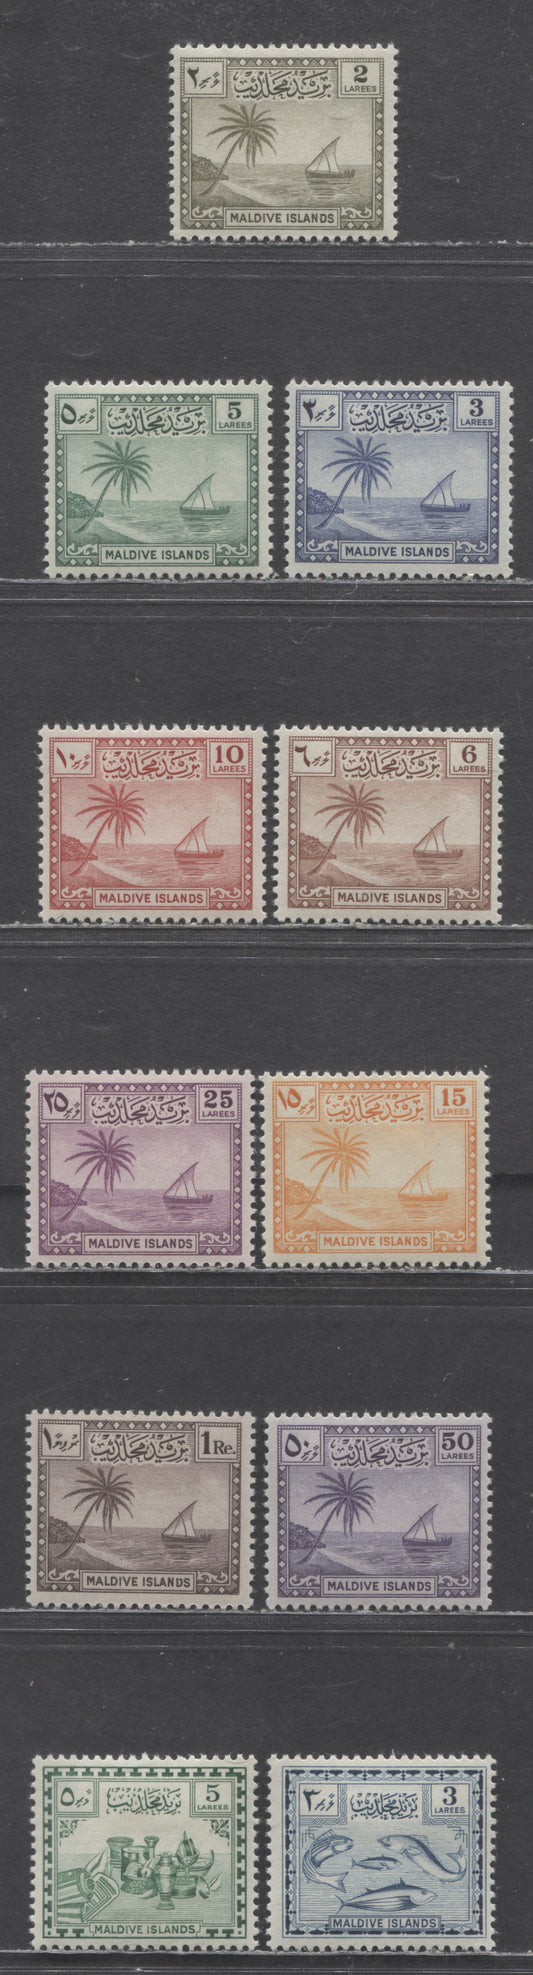 Lot 81 Maldive Islands SC#20-30 1950 Palm Tree & Seascape Definitives, 11 VFOG Singles, Click on Listing to See ALL Pictures, Estimated Value $30